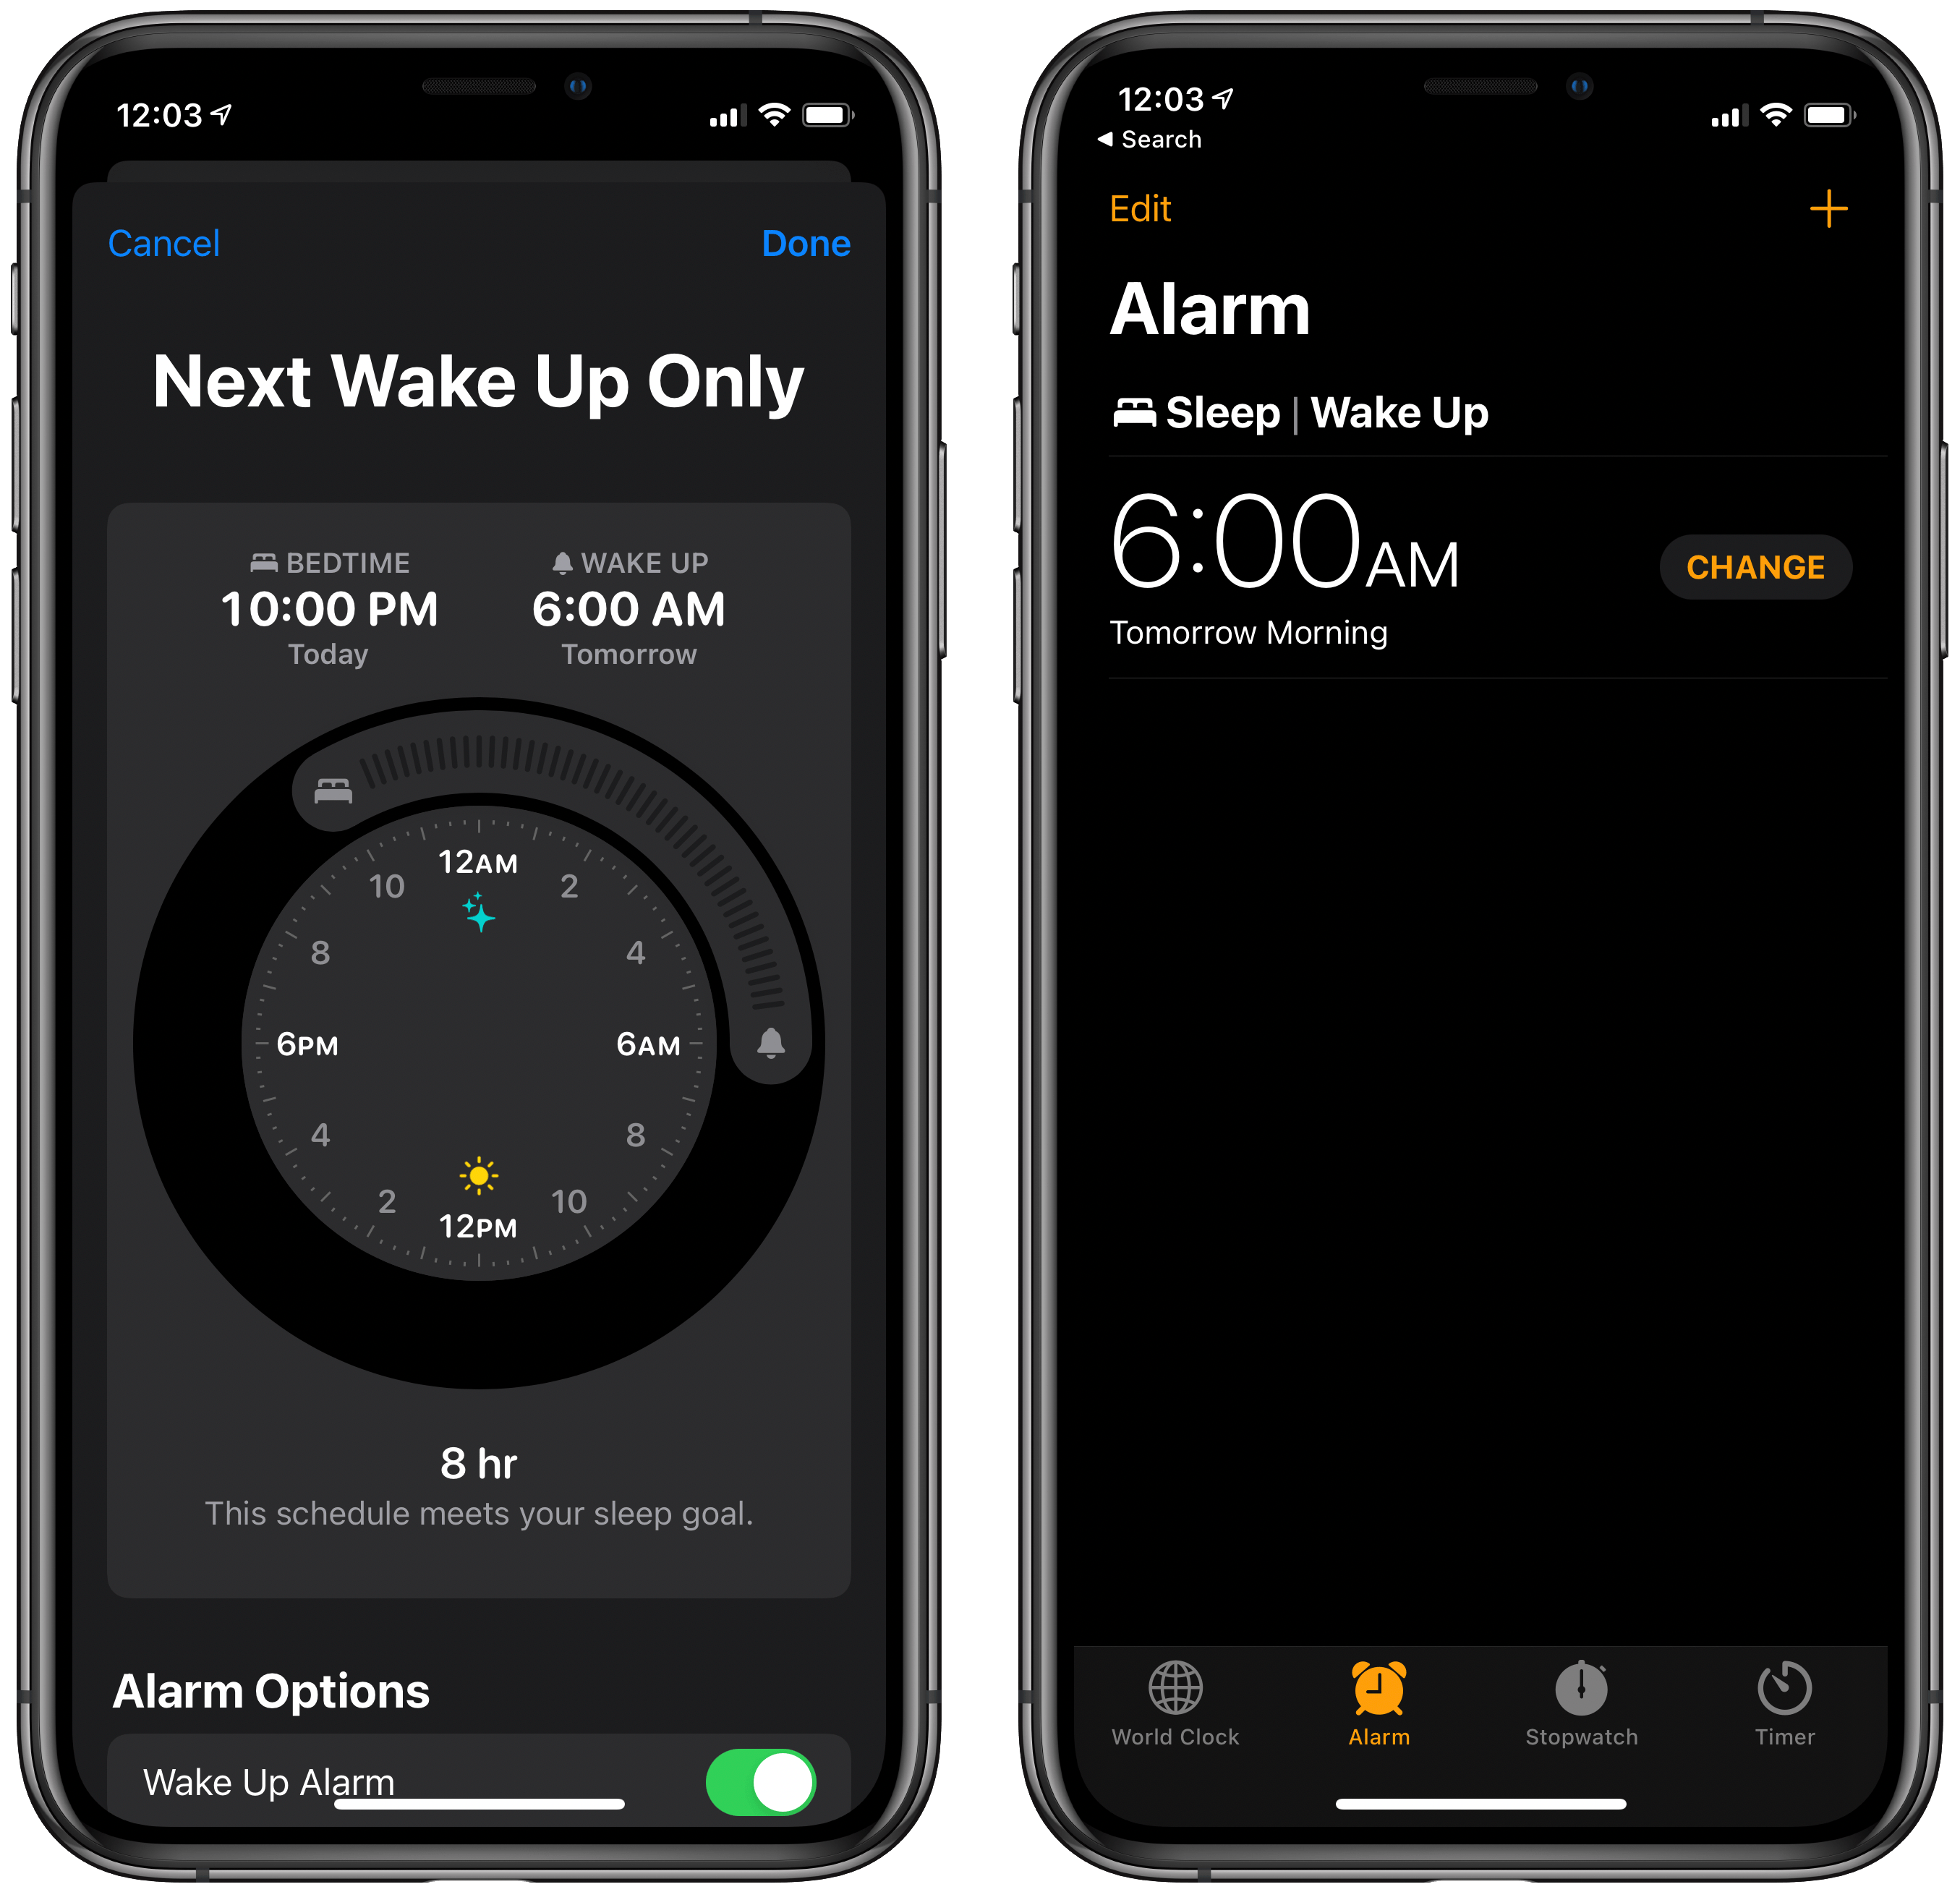 Modifying the next wake up in Health (left) or Clock (right).